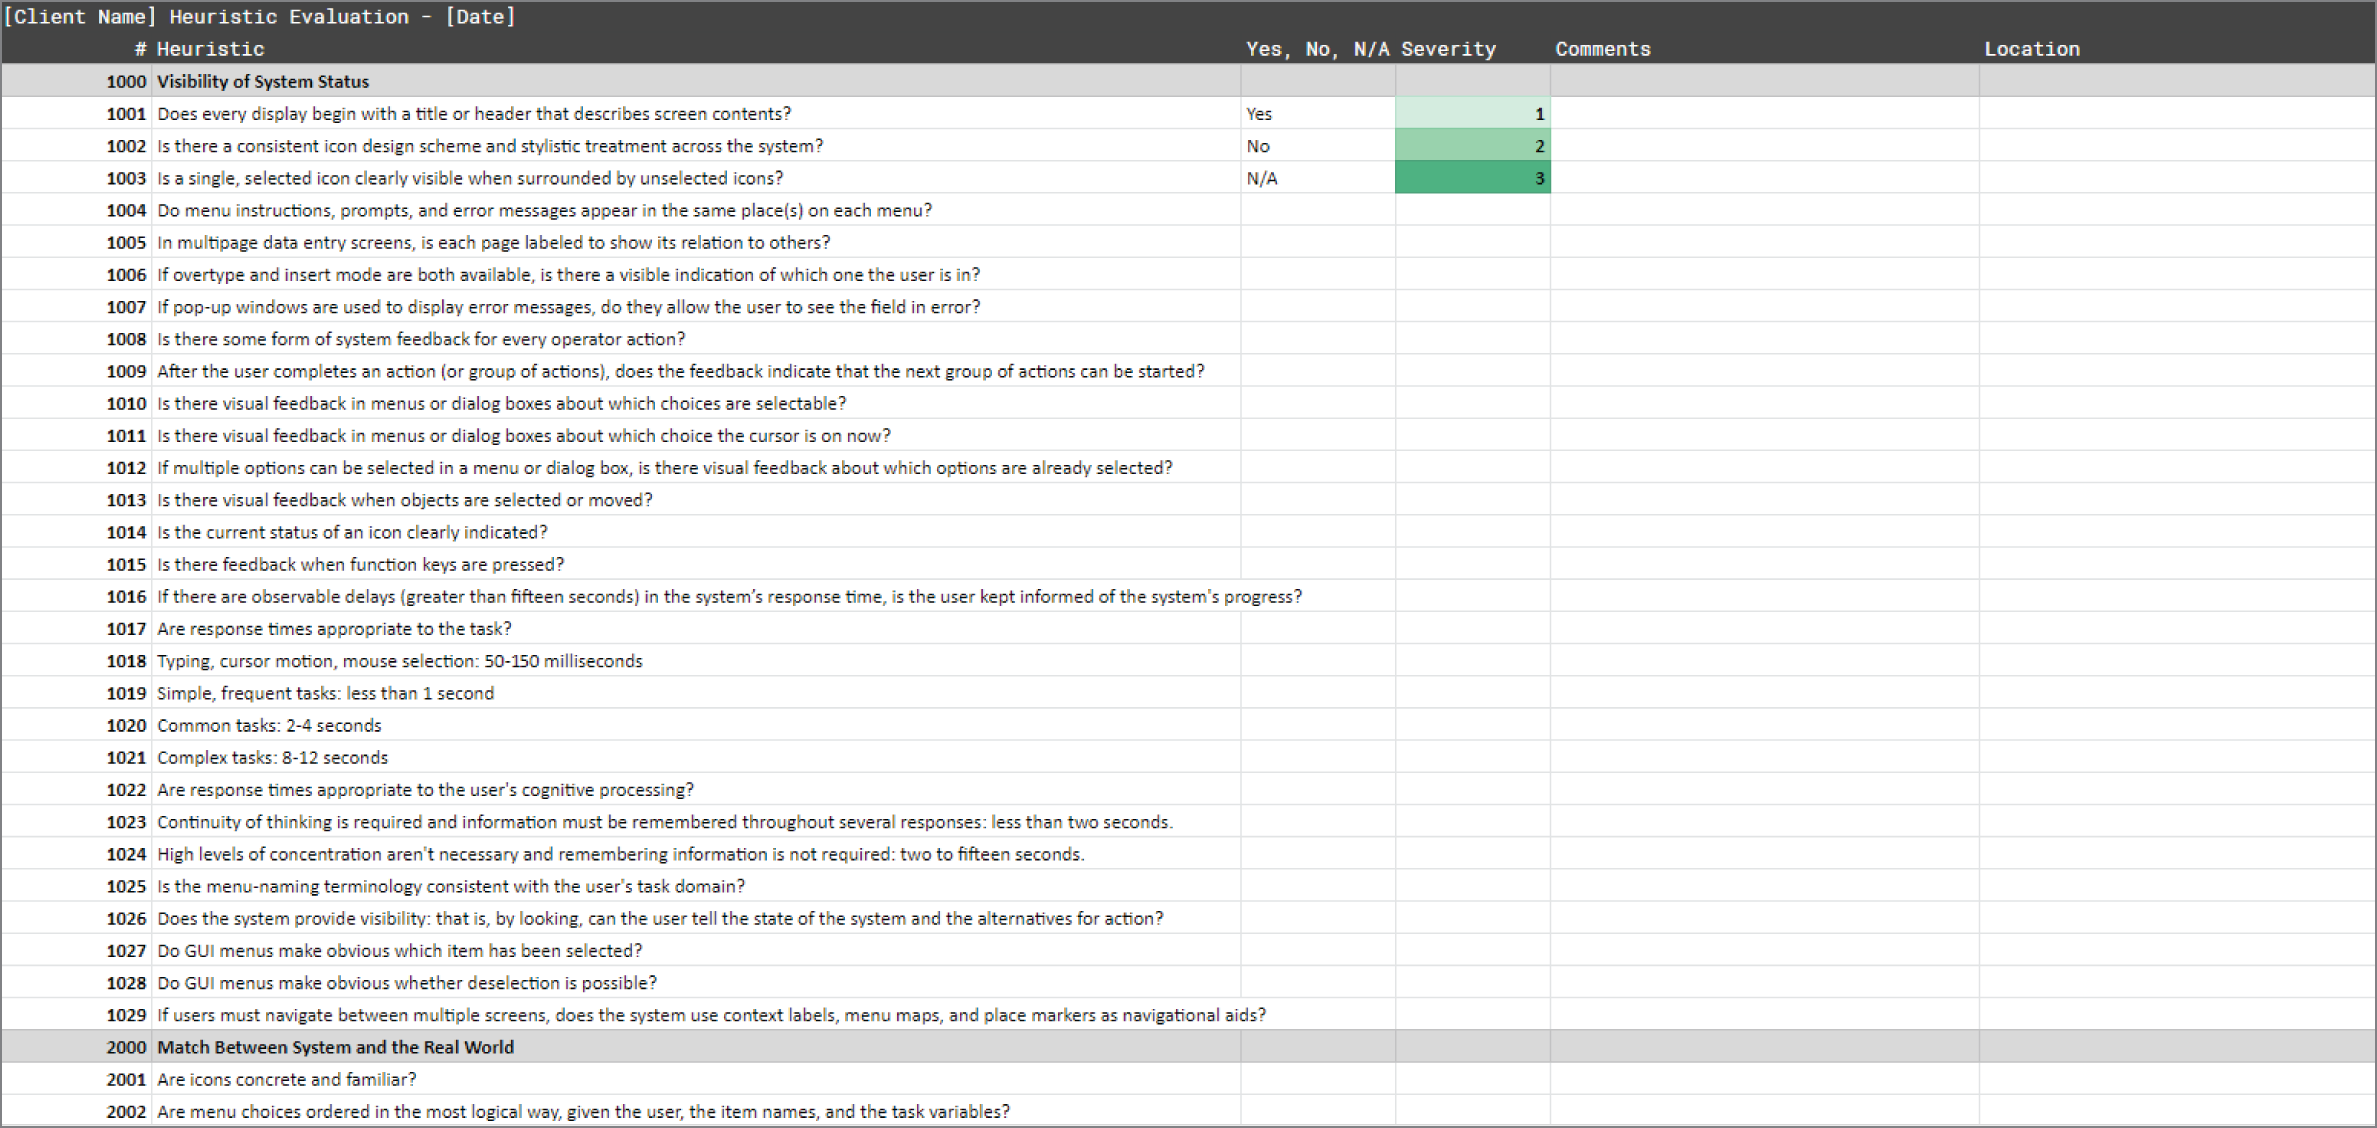 Screenshot of a spreadsheet depicting a heuristic evaluation that helps customers know exactly where their issues are and where their system stands.